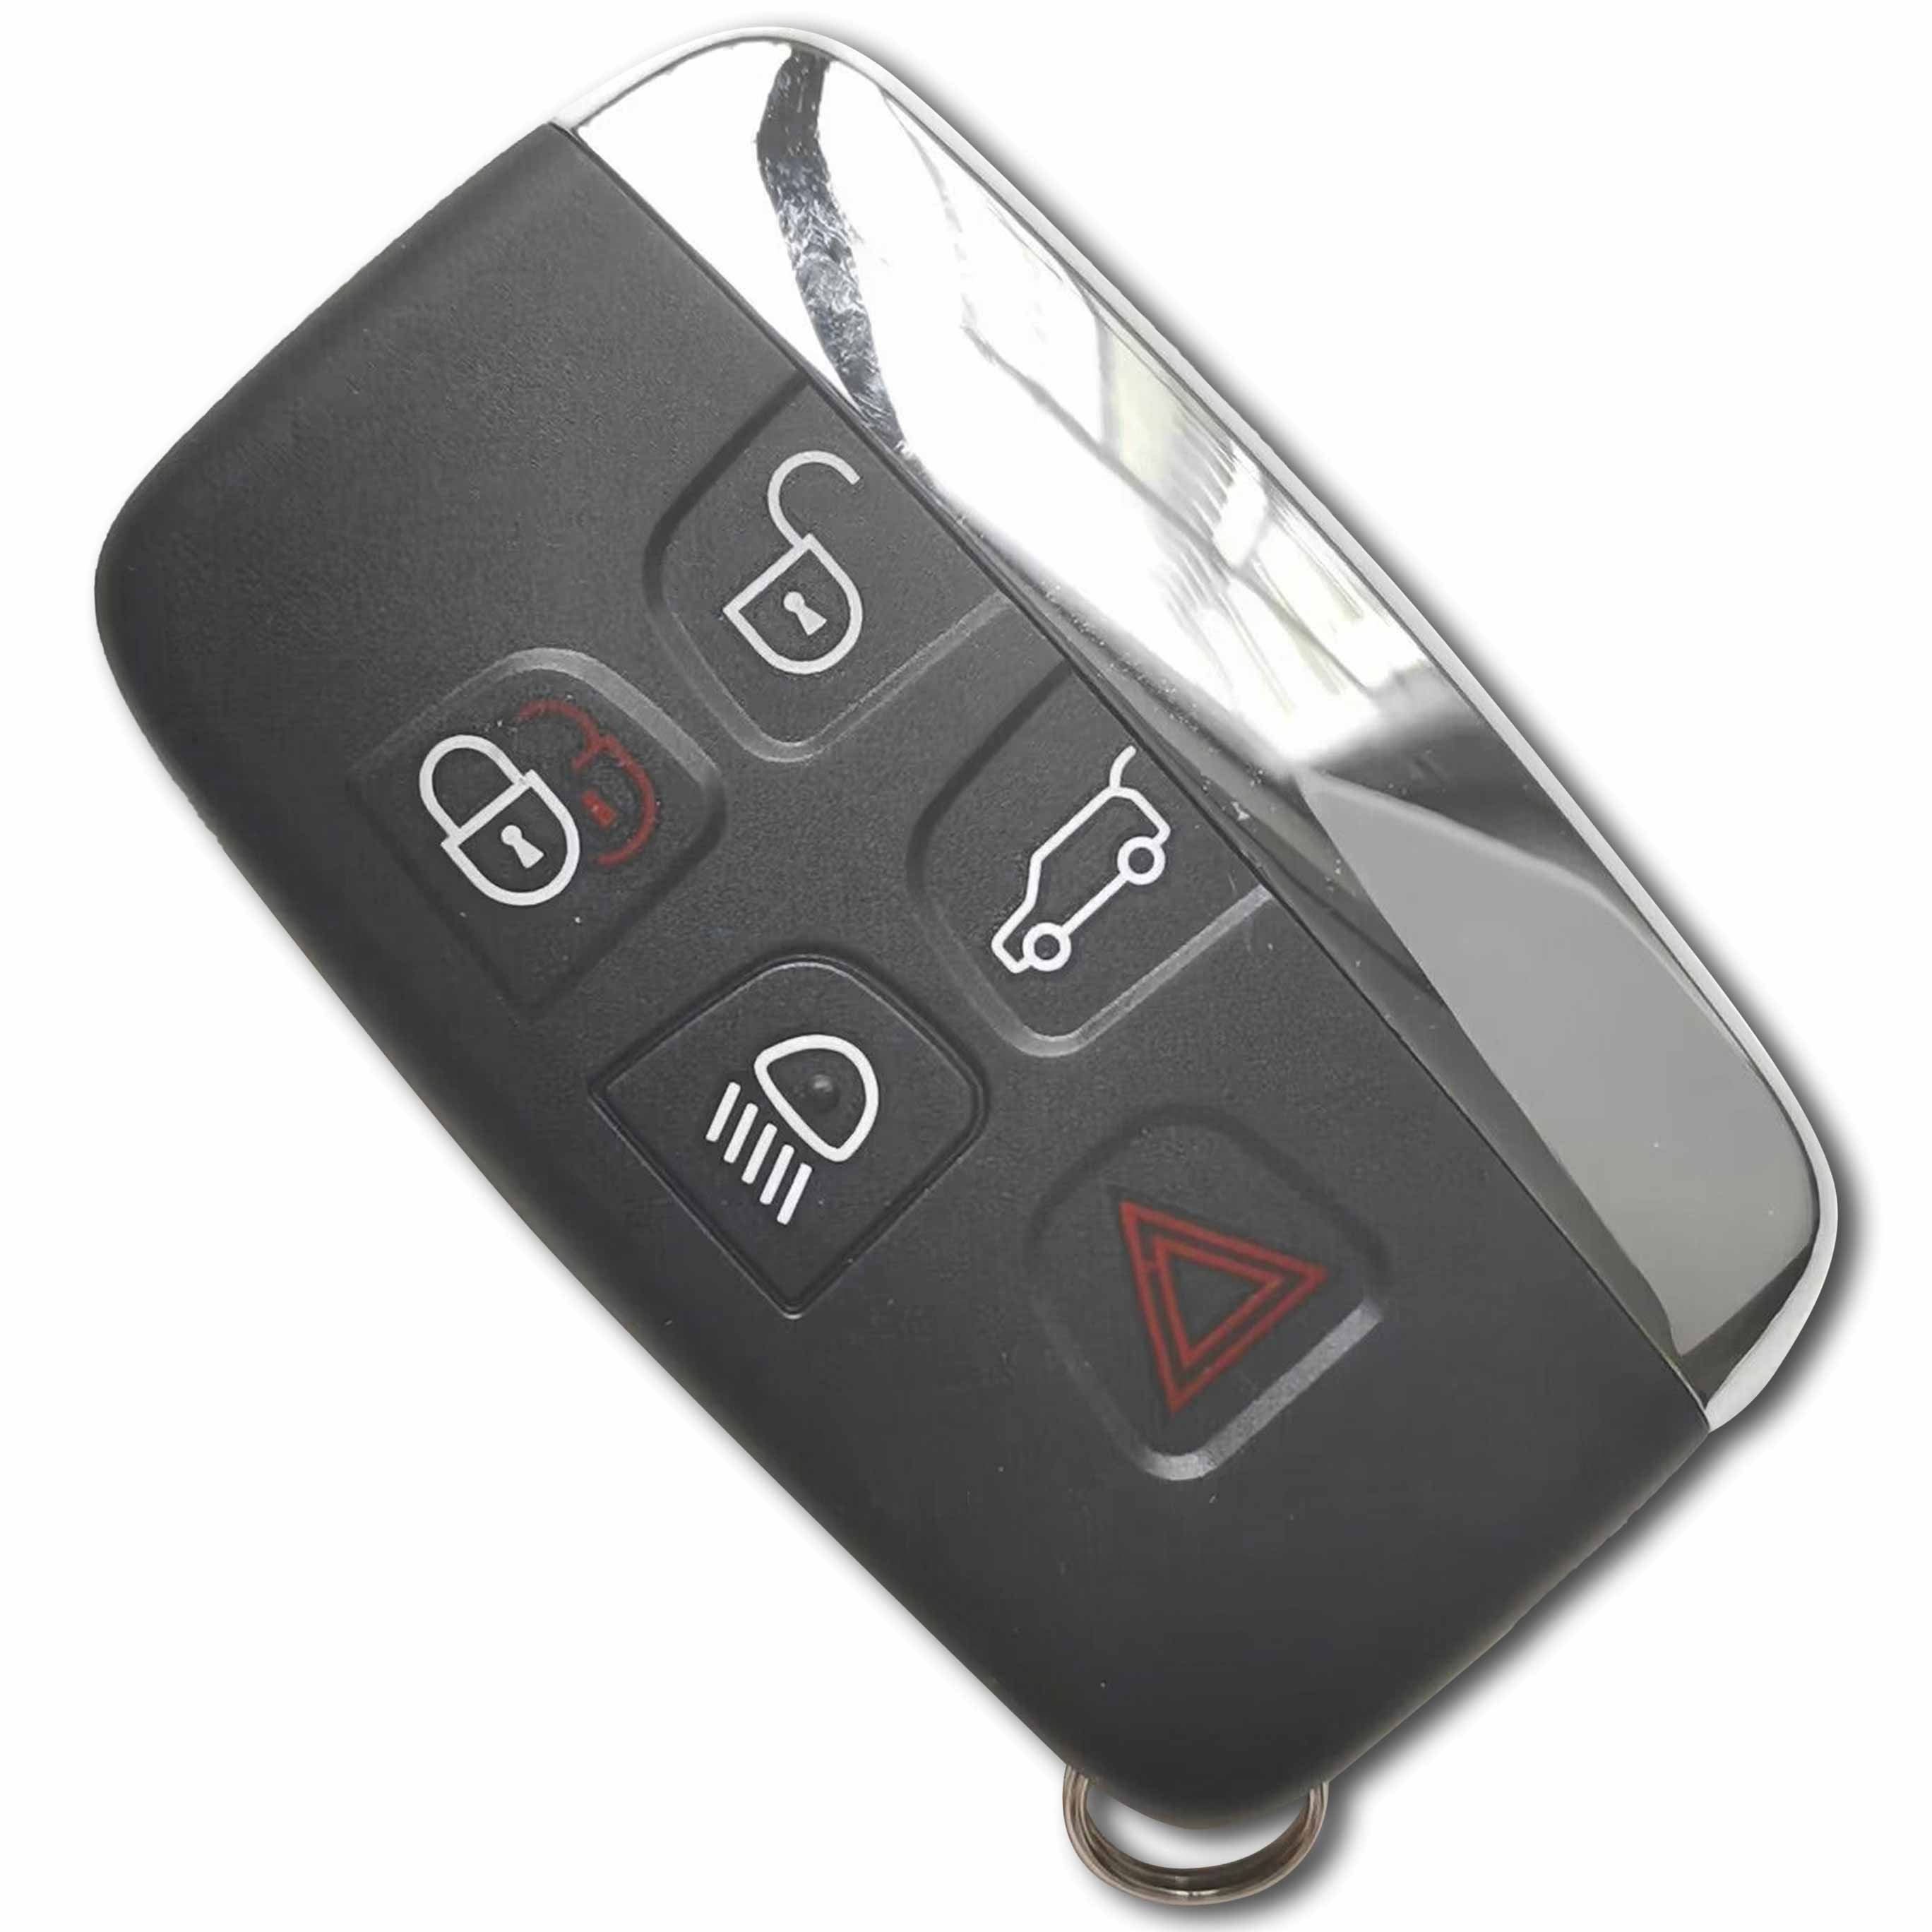  ( with Editable ID ) 433 MHz Smart Key for Range Rover Sport Evoque